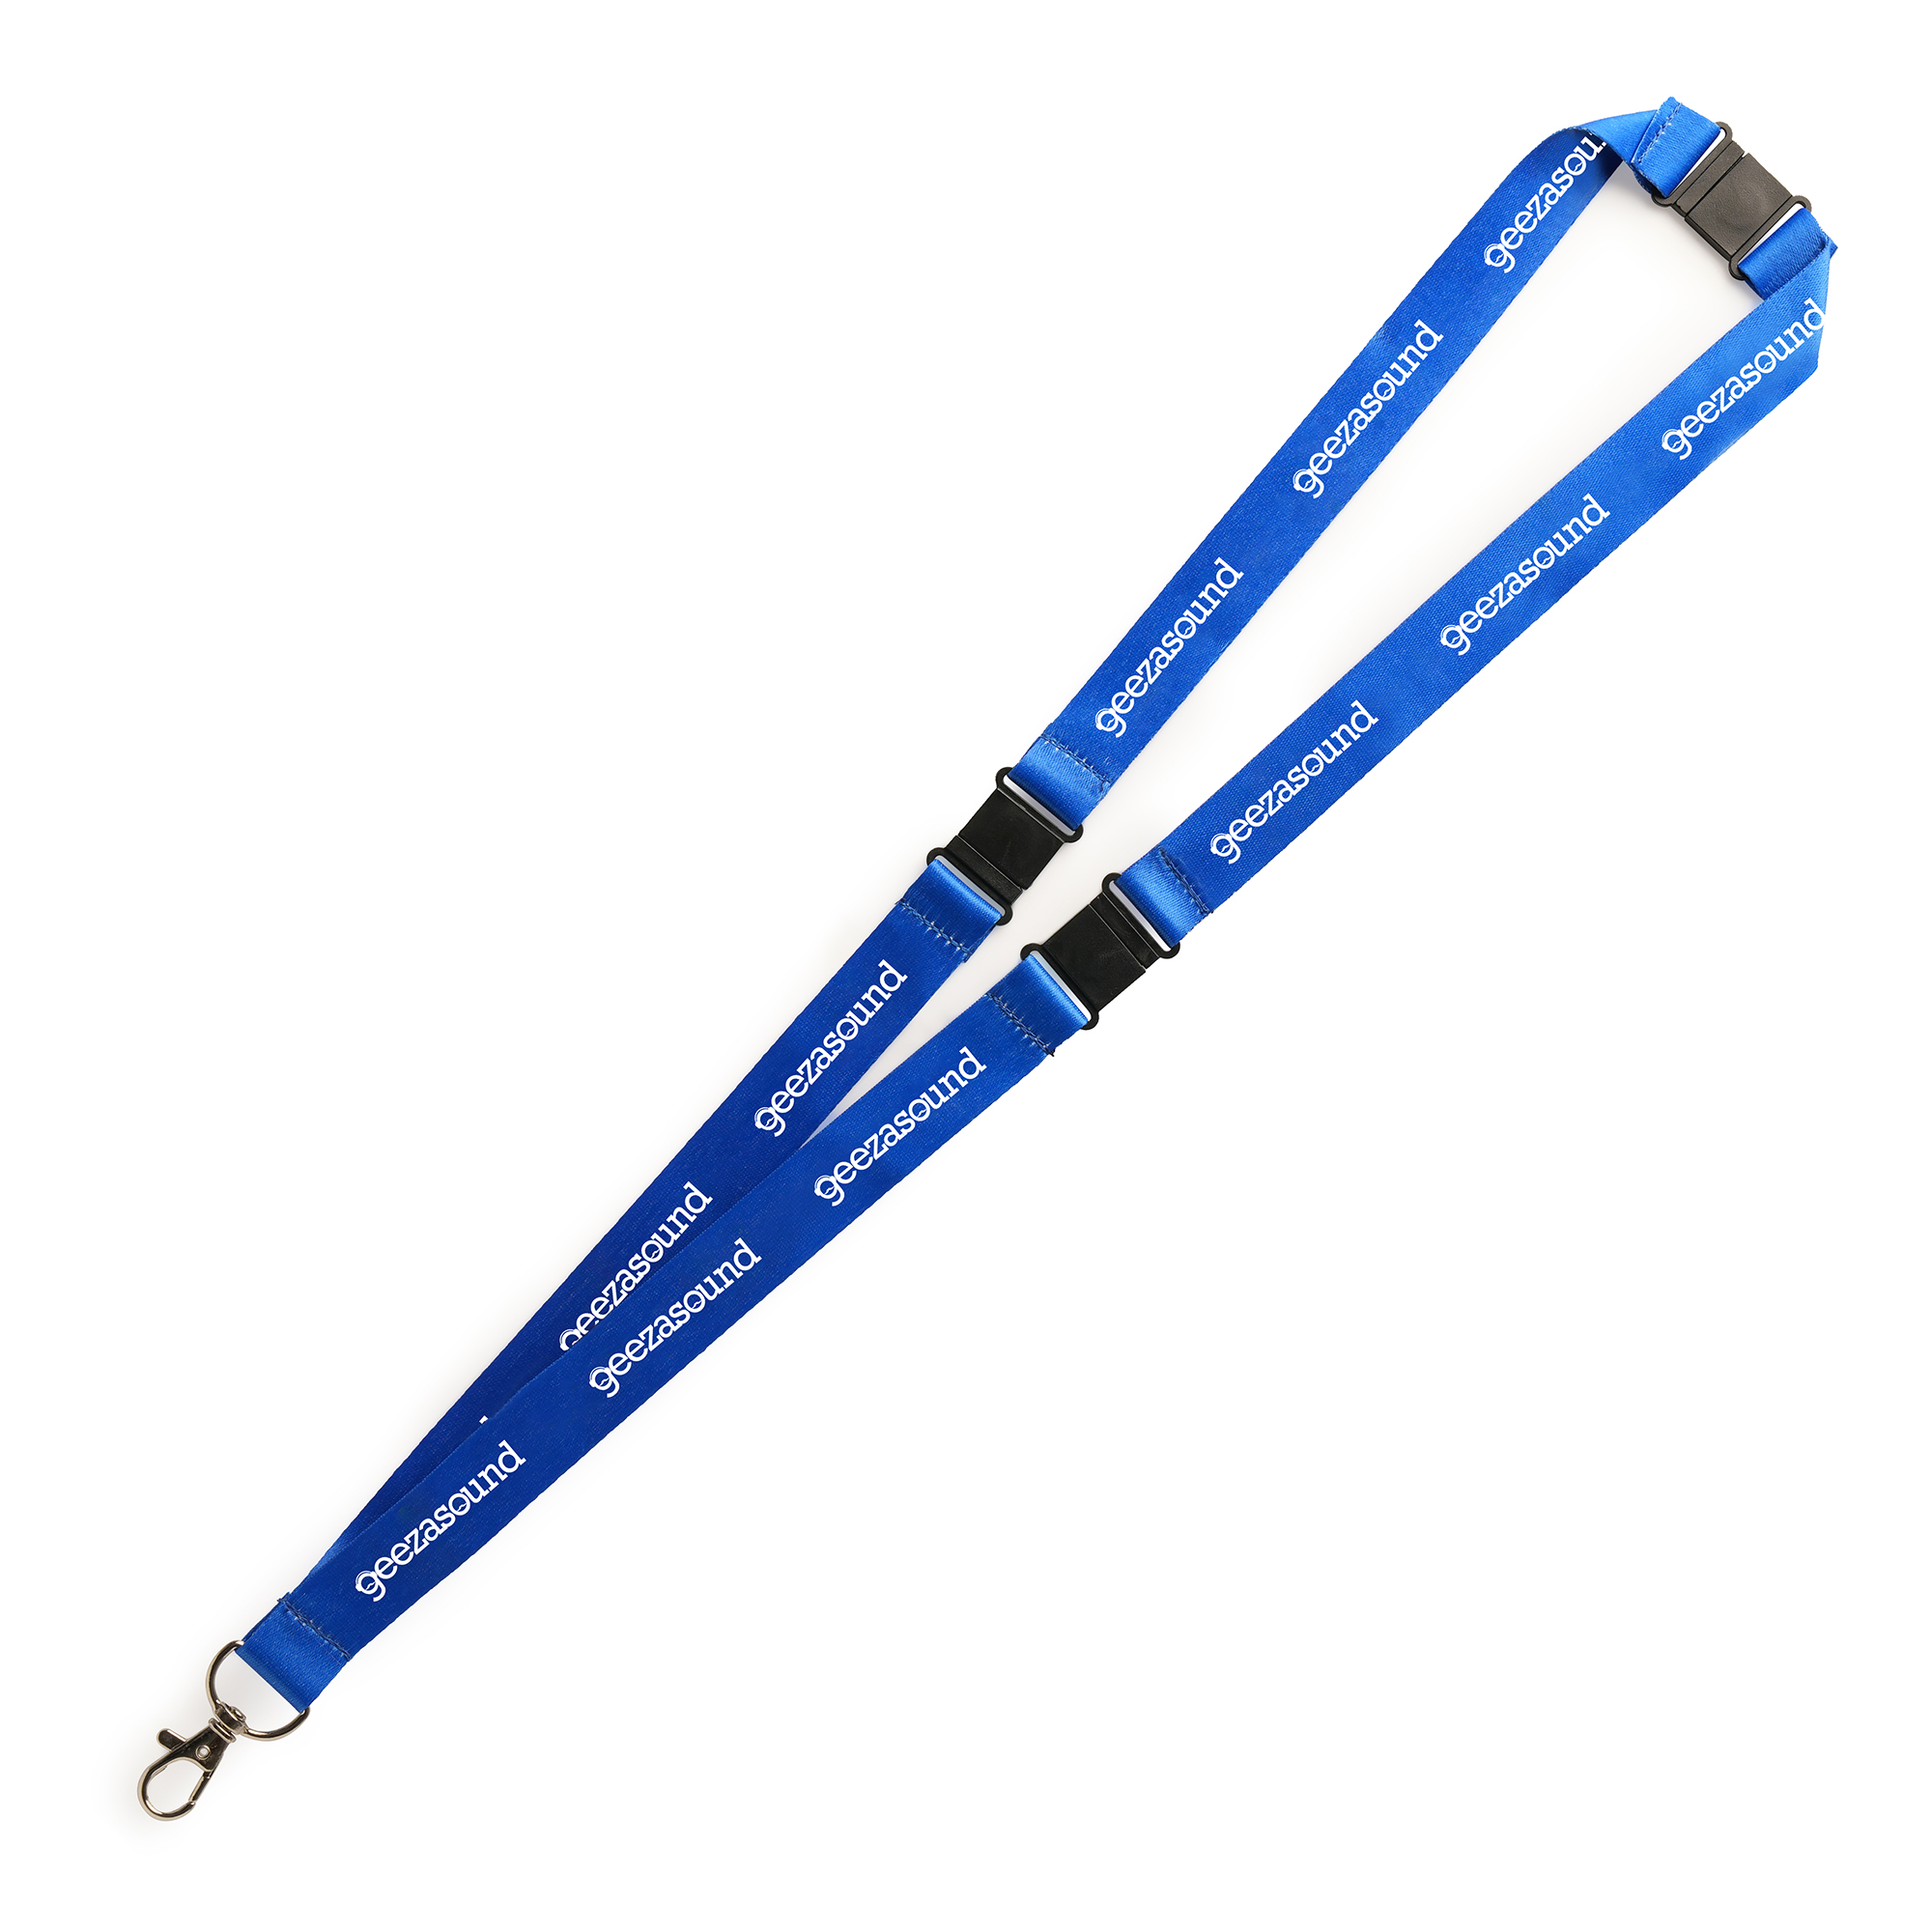 Fully customisable lanyard made from eco-friendly RPET. Full colour dye sublimation with fitted safety breaks and trigger clips.